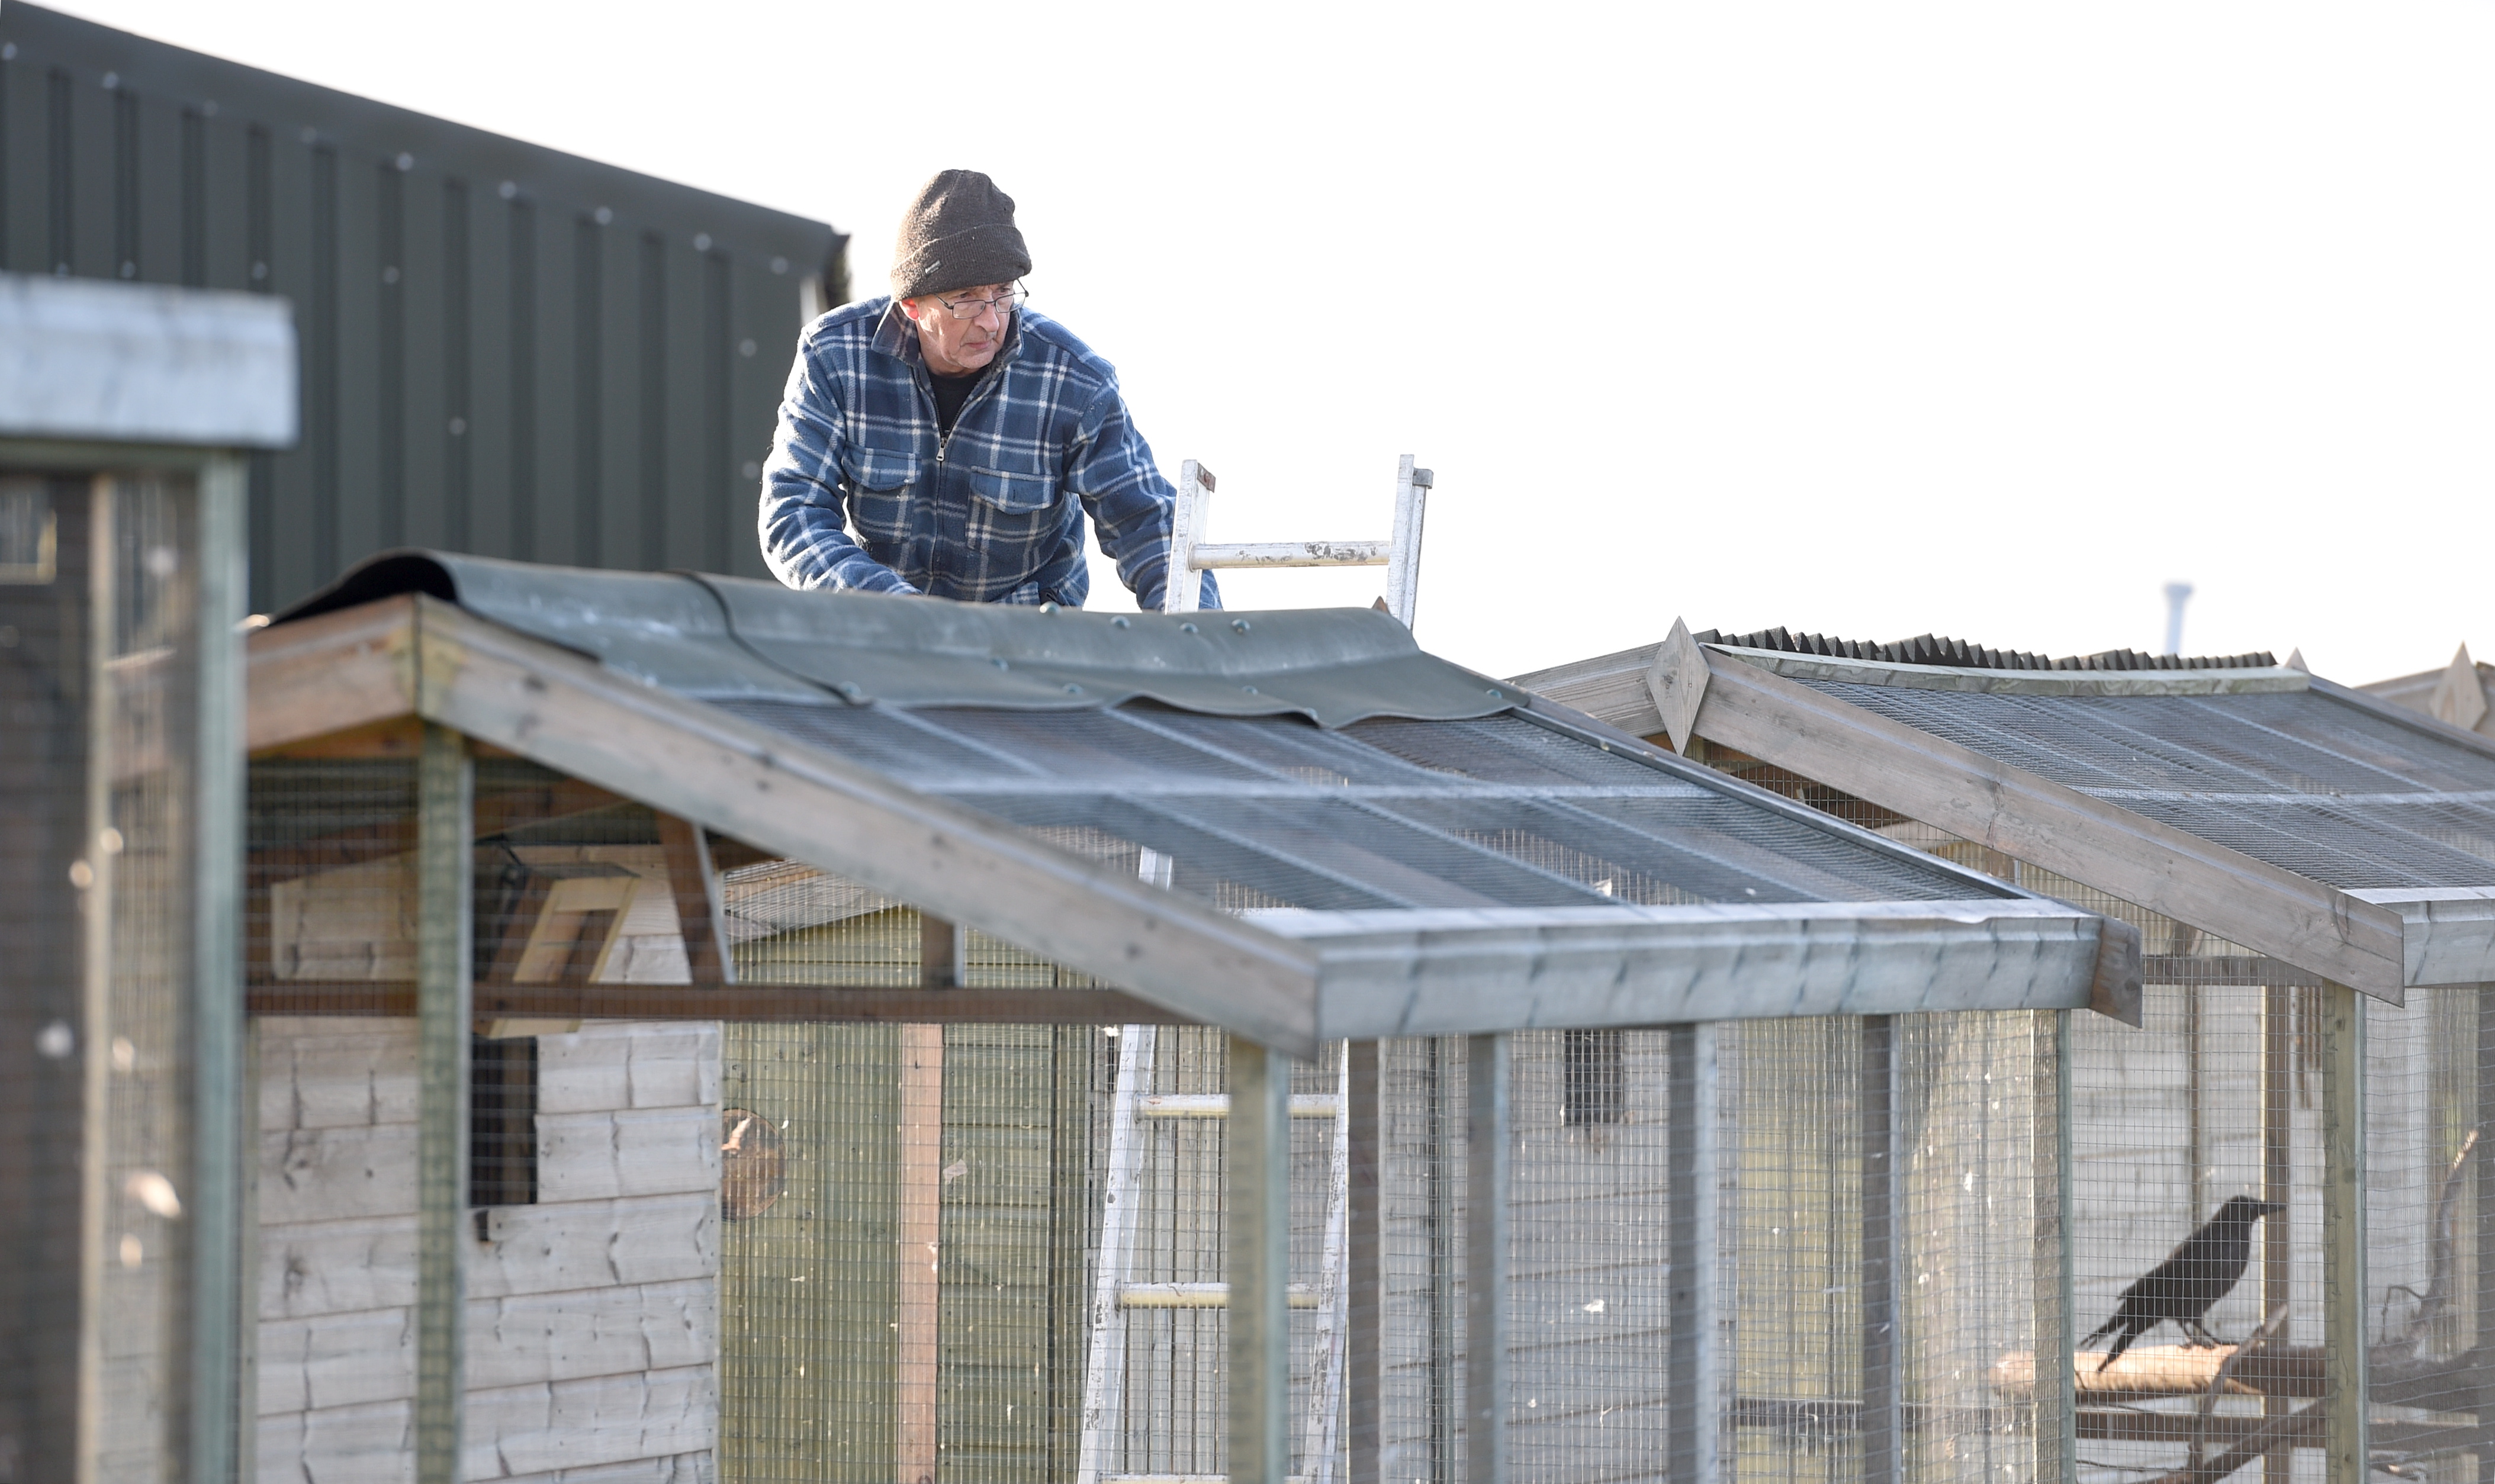 Volunteer Pete Bruce is working to put new roofing on the aviaries